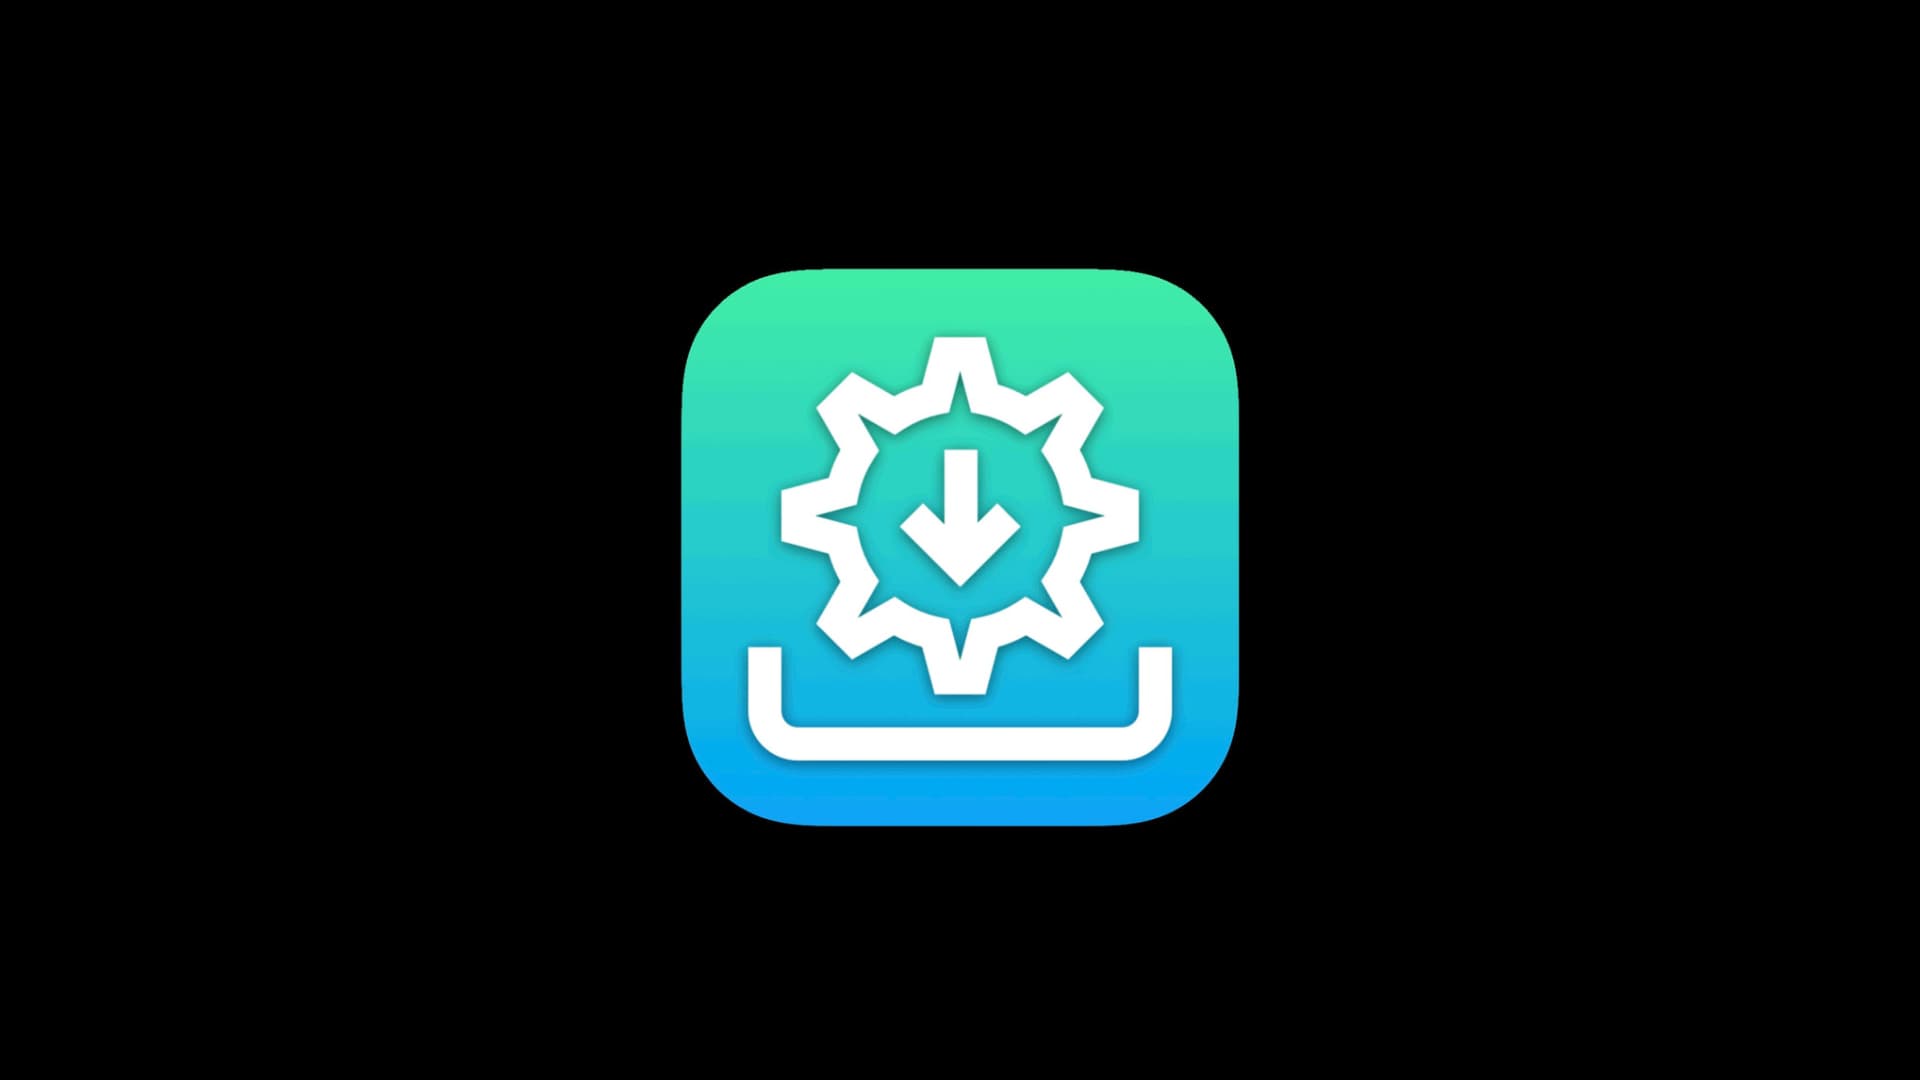 Sideloadly app icon against a black background.